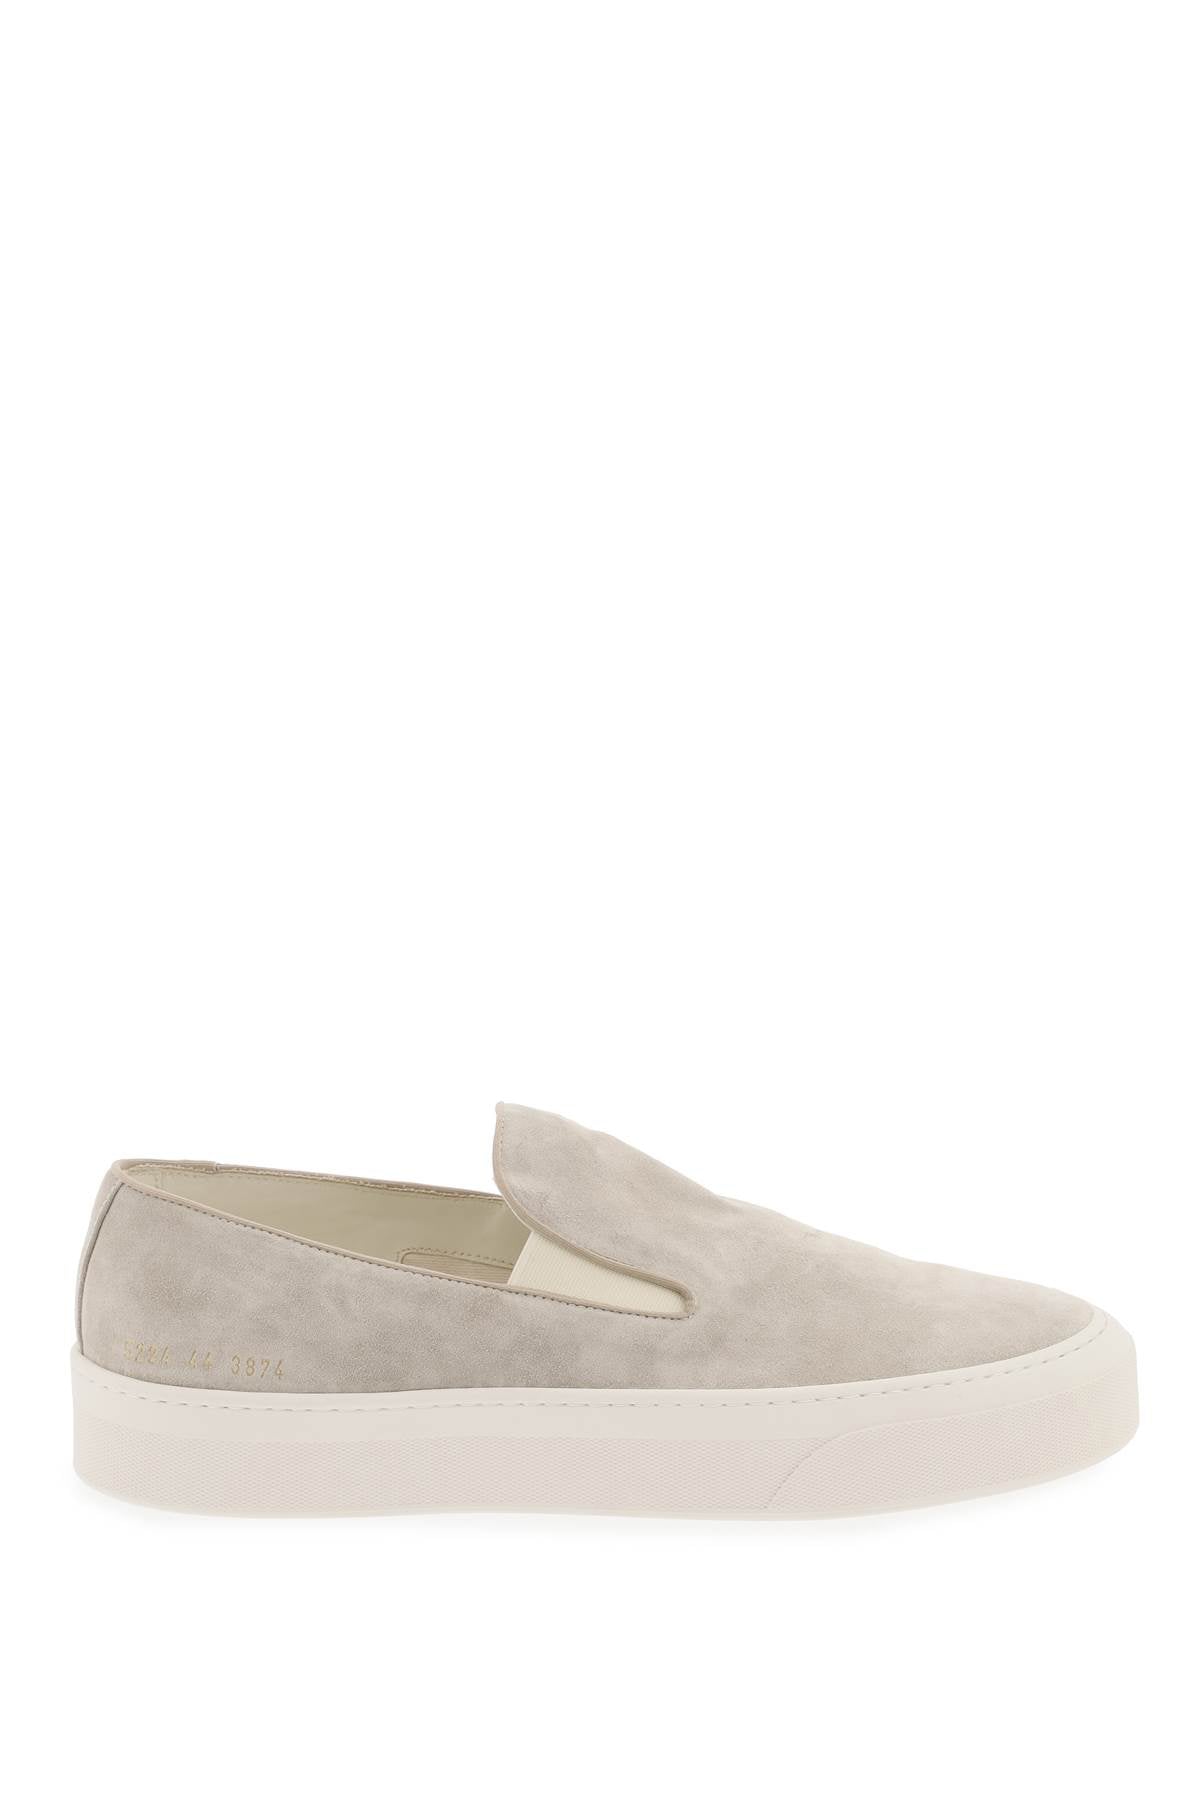 Common projects slip-on sneakers-0